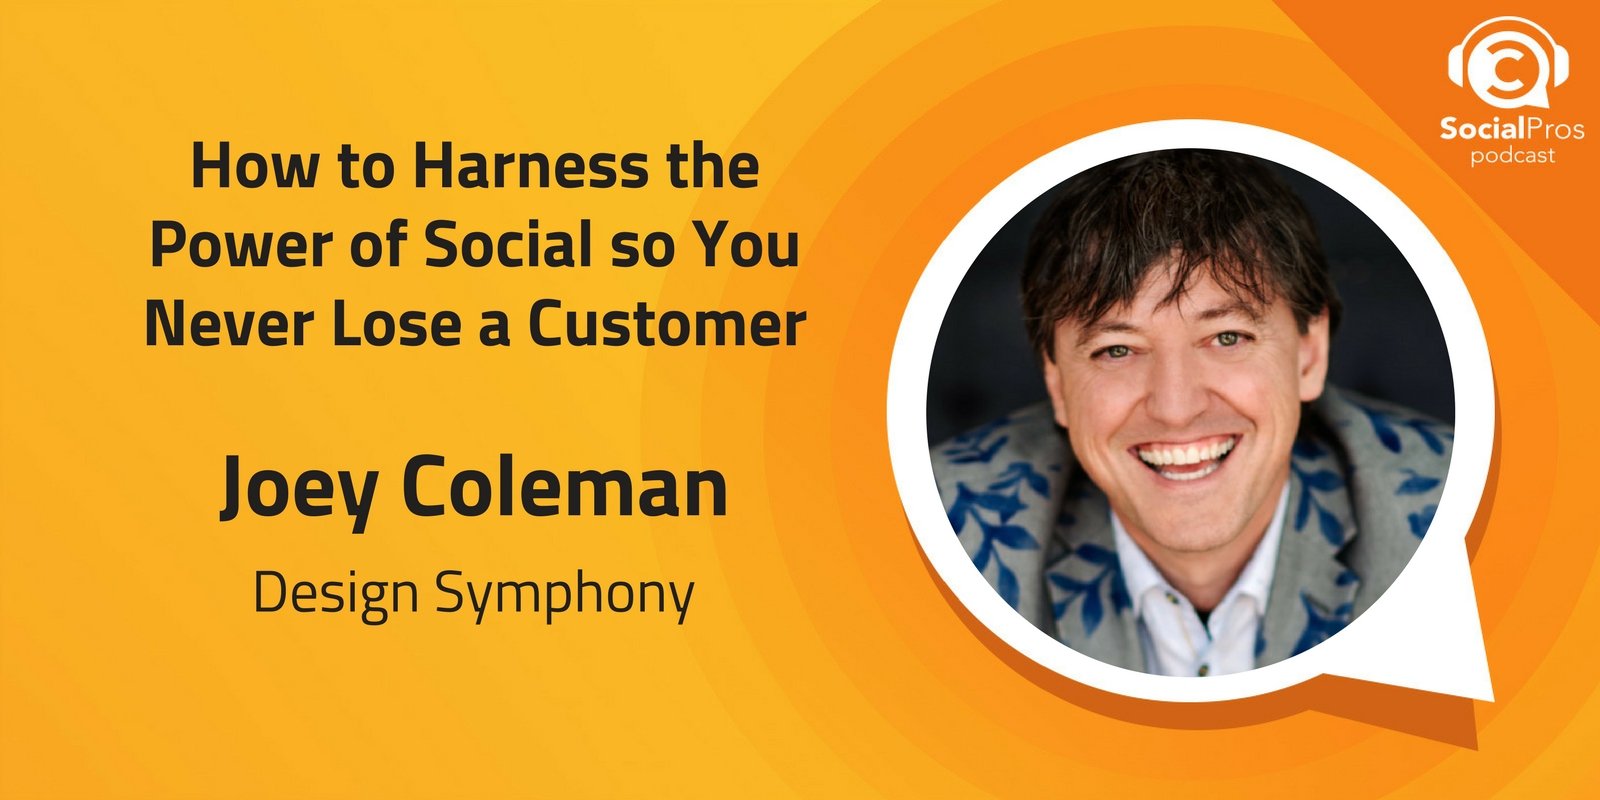 How to Harness the Power of Social so You Never Lose a Customer